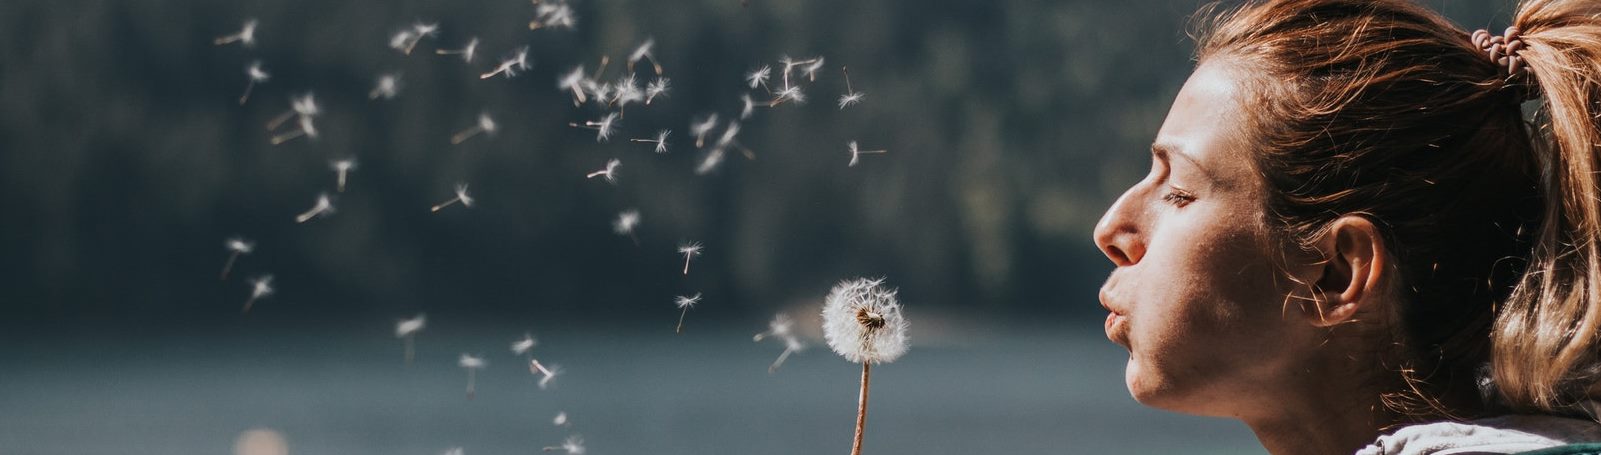 Woman blowing dandelions into the air